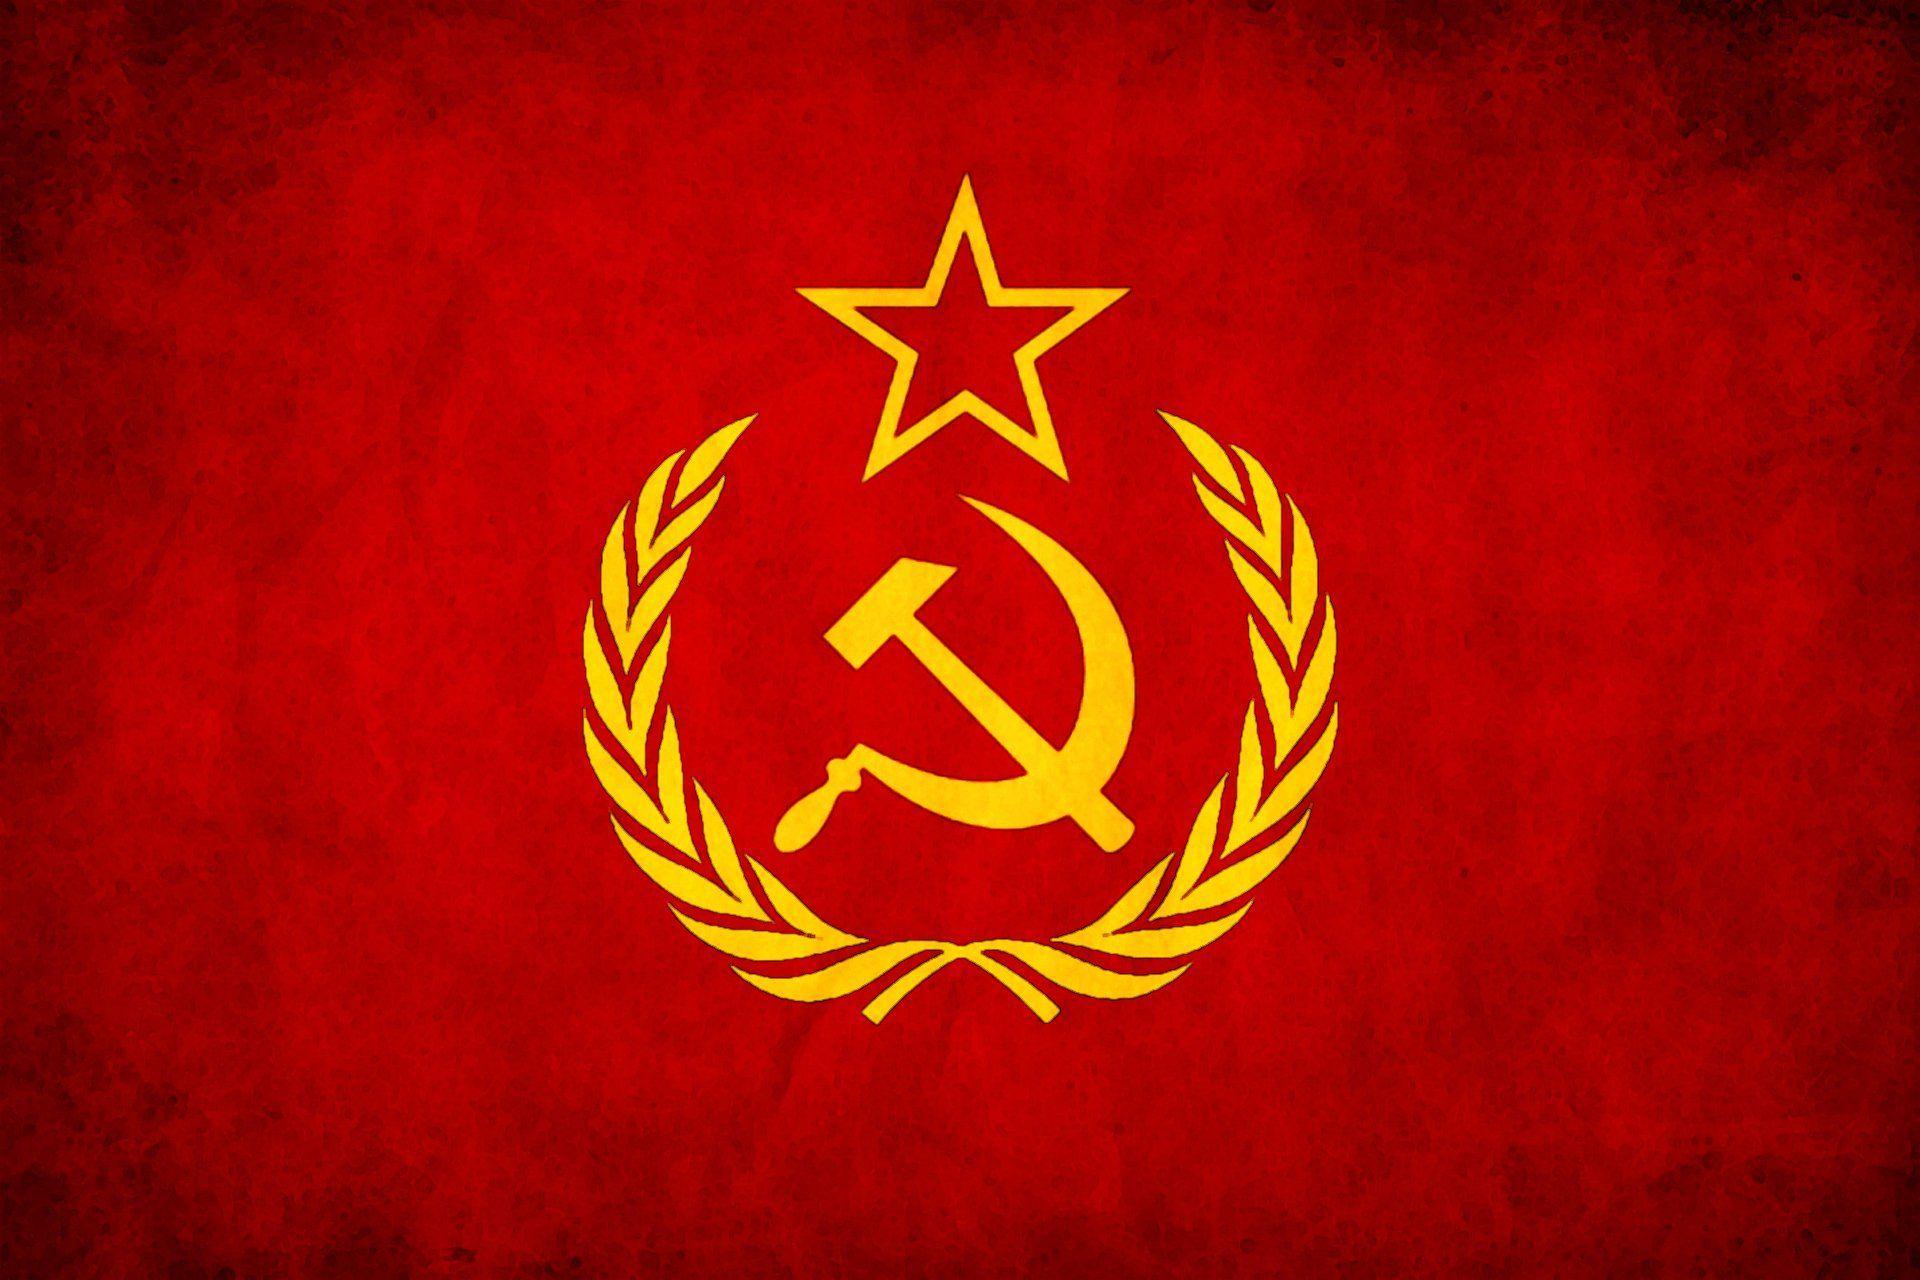 download cccp for mac free